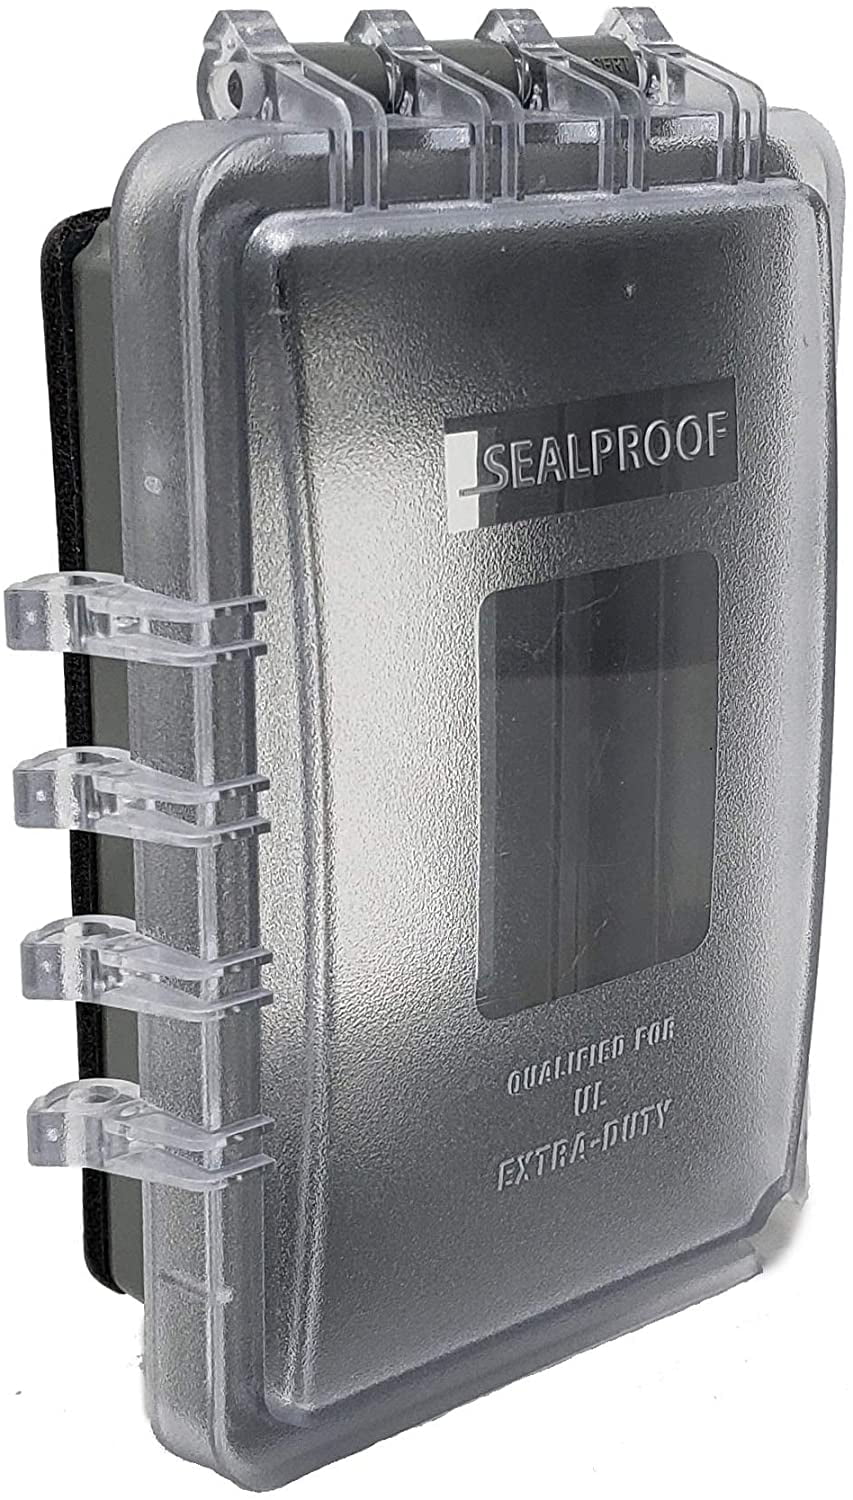 1 Gang Deep Weatherproof in Use Outdoor Outlet Cover Lockable UL Extra Duty Comp for sale online 